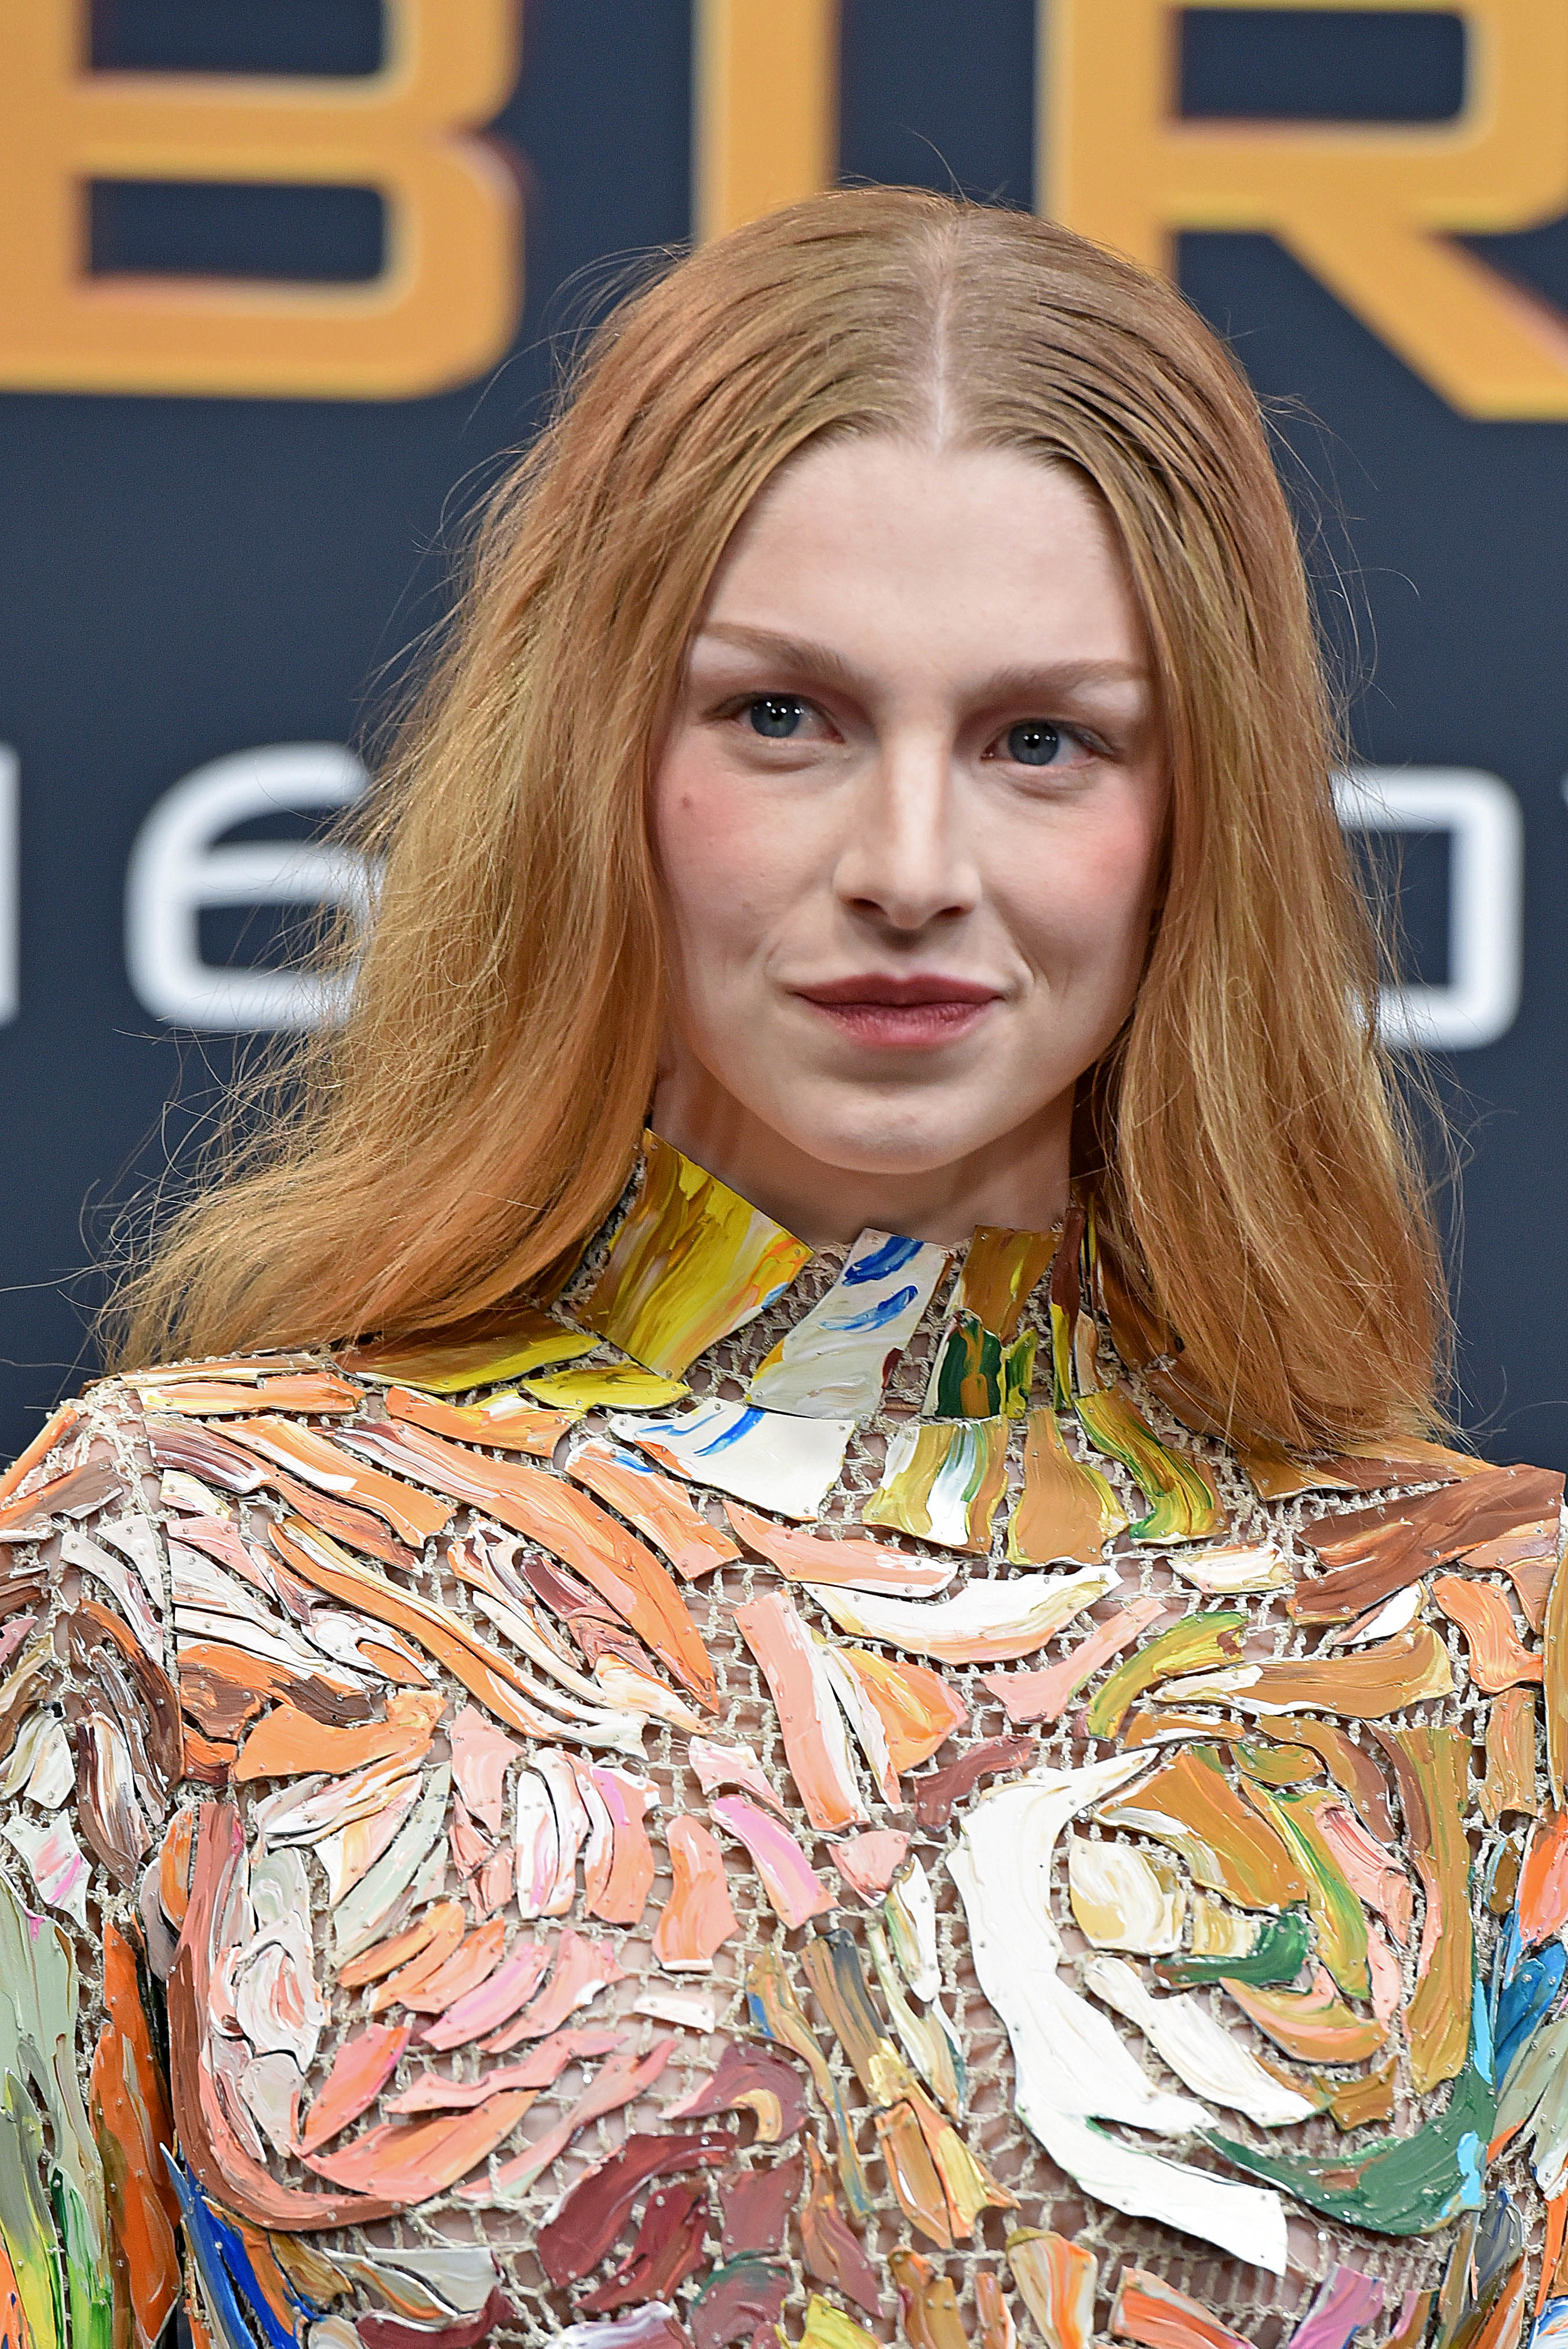 Close-up of Hunter in a multicolored long-sleeved, high-neck dress at a media event